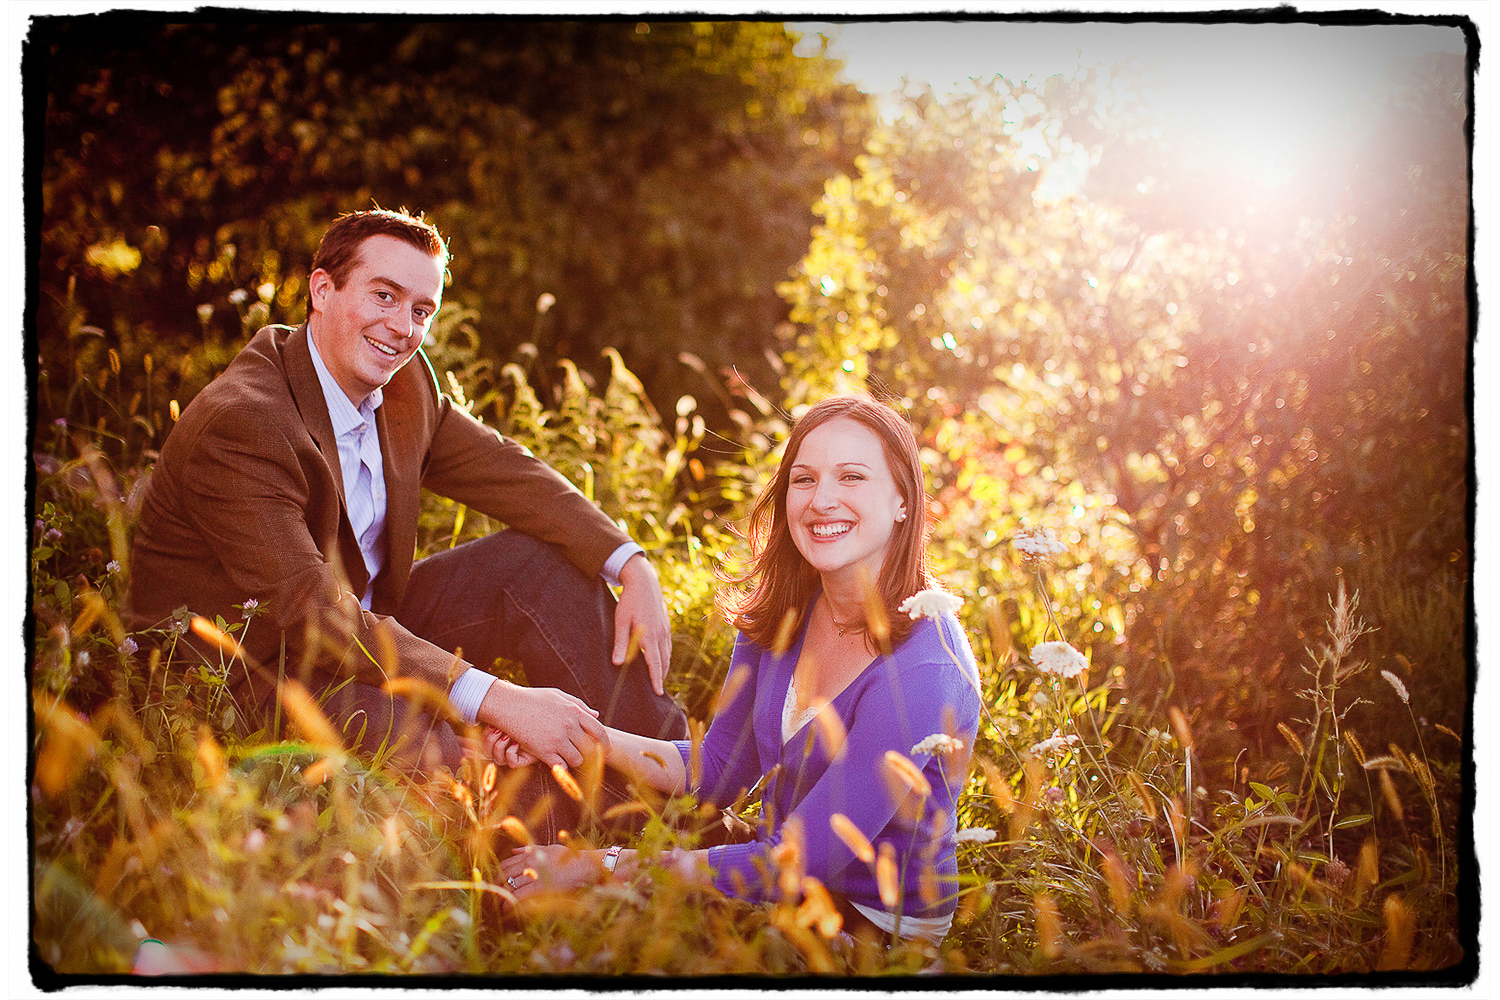 Engagement Portraits: Amy & Mike in the grass at Brooklyn Bridge Park.